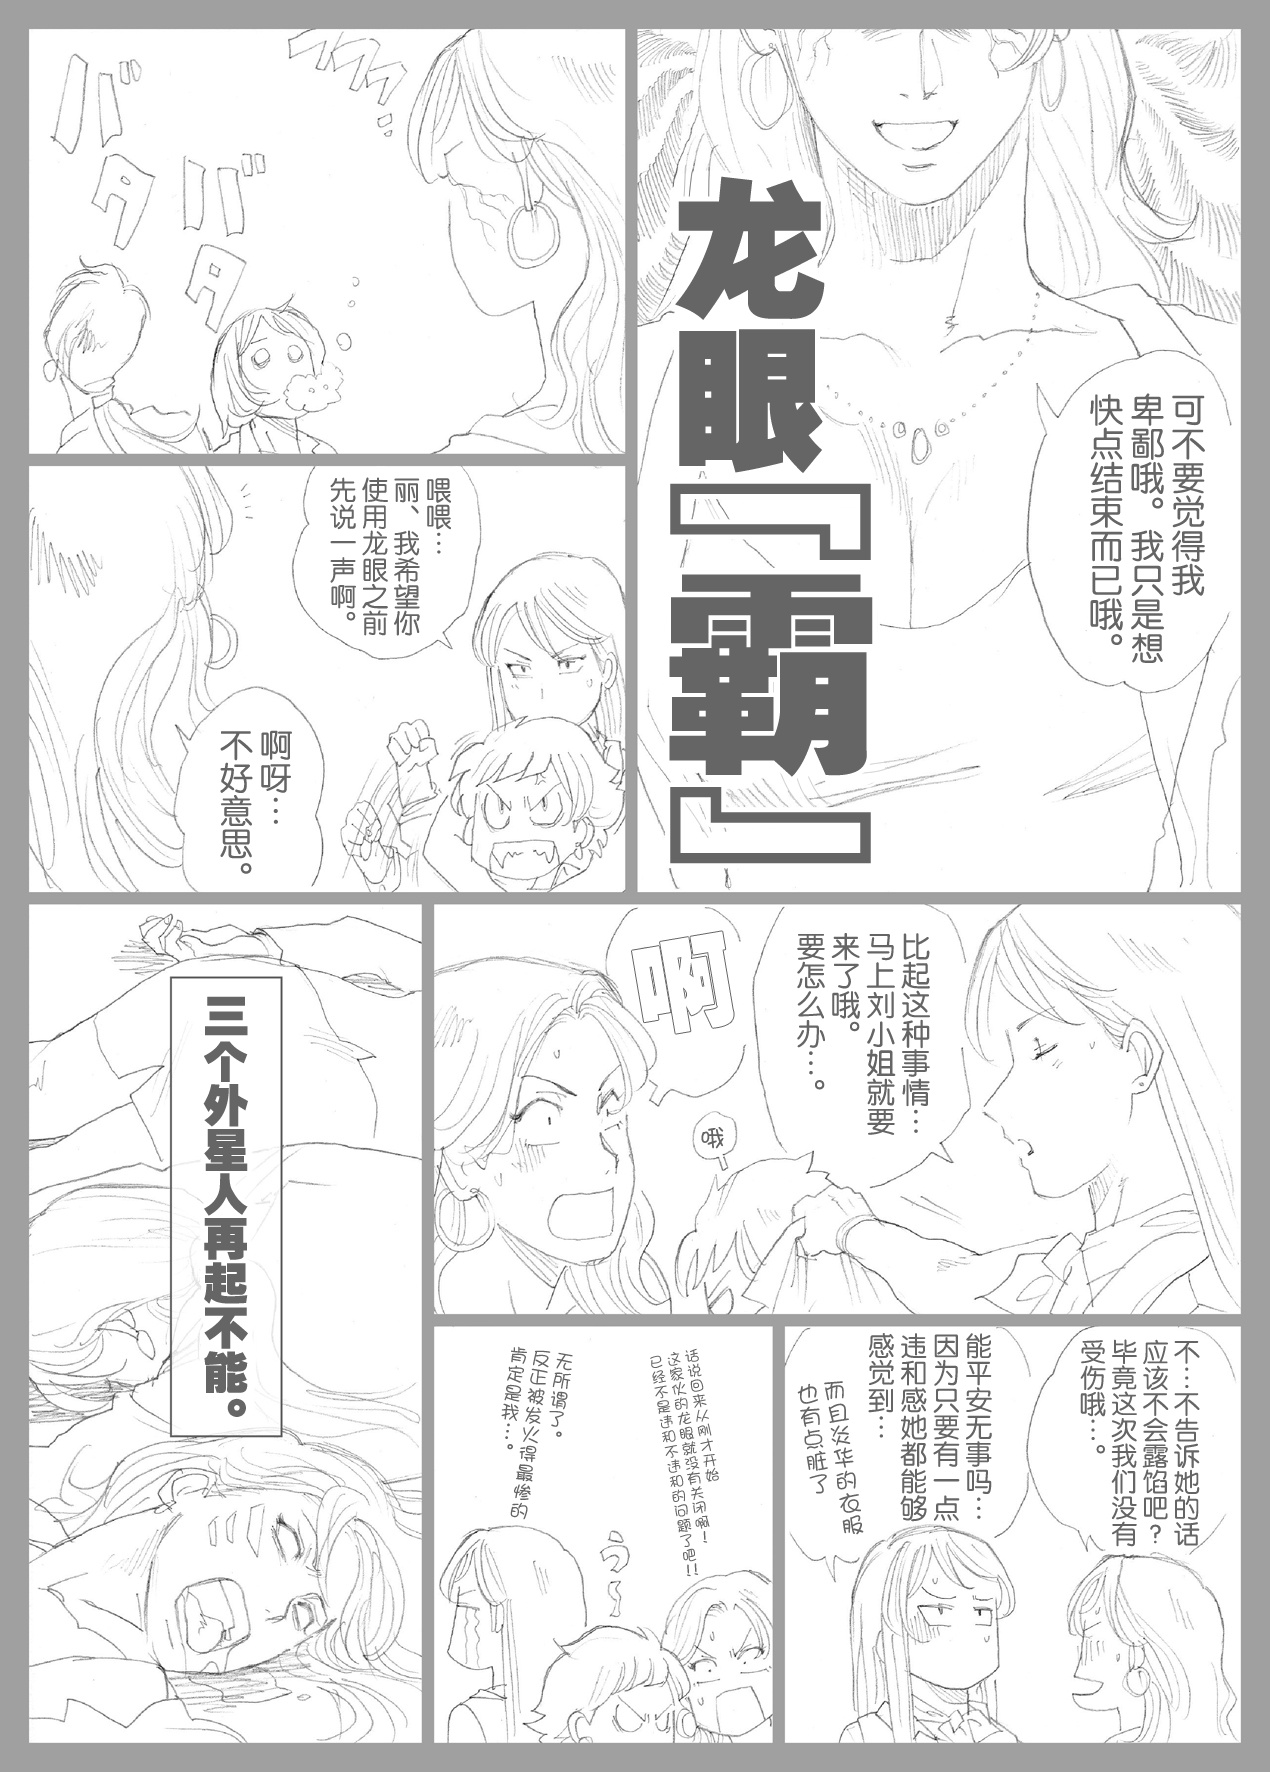 [Urban Doujin Magazine] Mousou Tokusatsu Series Ultra Madam 9 (another end) [Chinese] [不咕鸟汉化组] page 30 full